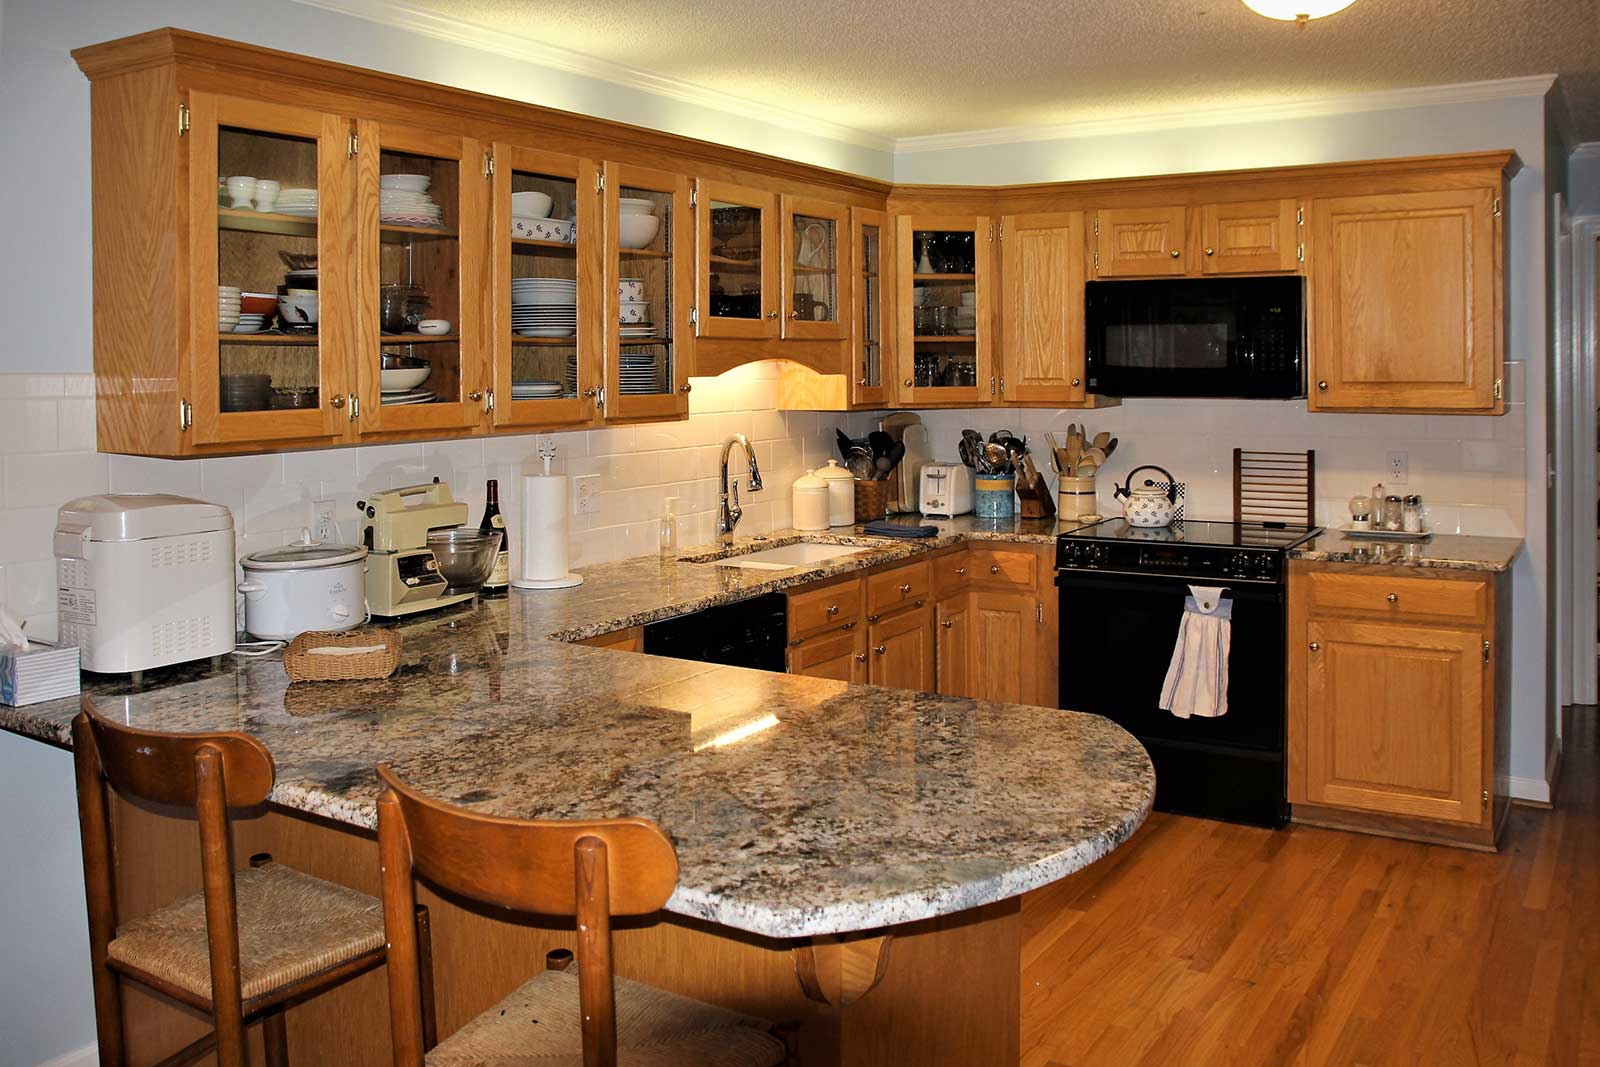 Full view of kitchen after remodeling